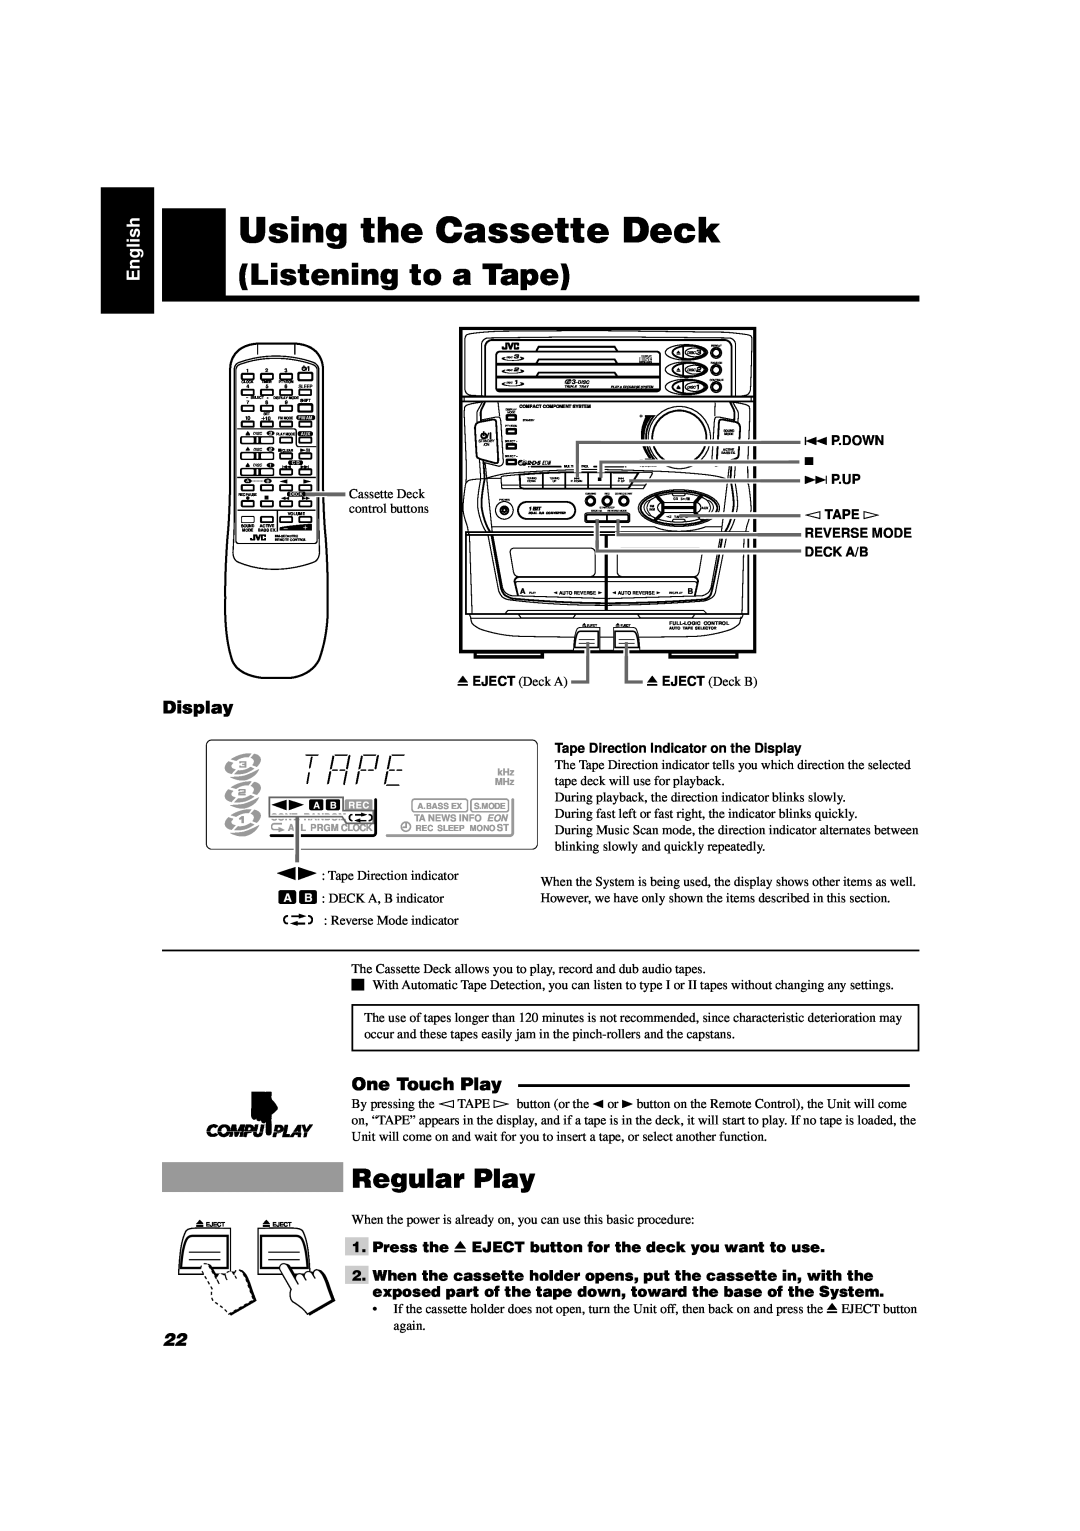 JVC CA-D451TR, CA-D551TR manual Using the Cassette Deck, Listening to a Tape, Regular Play, One Touch Play, English, Display 